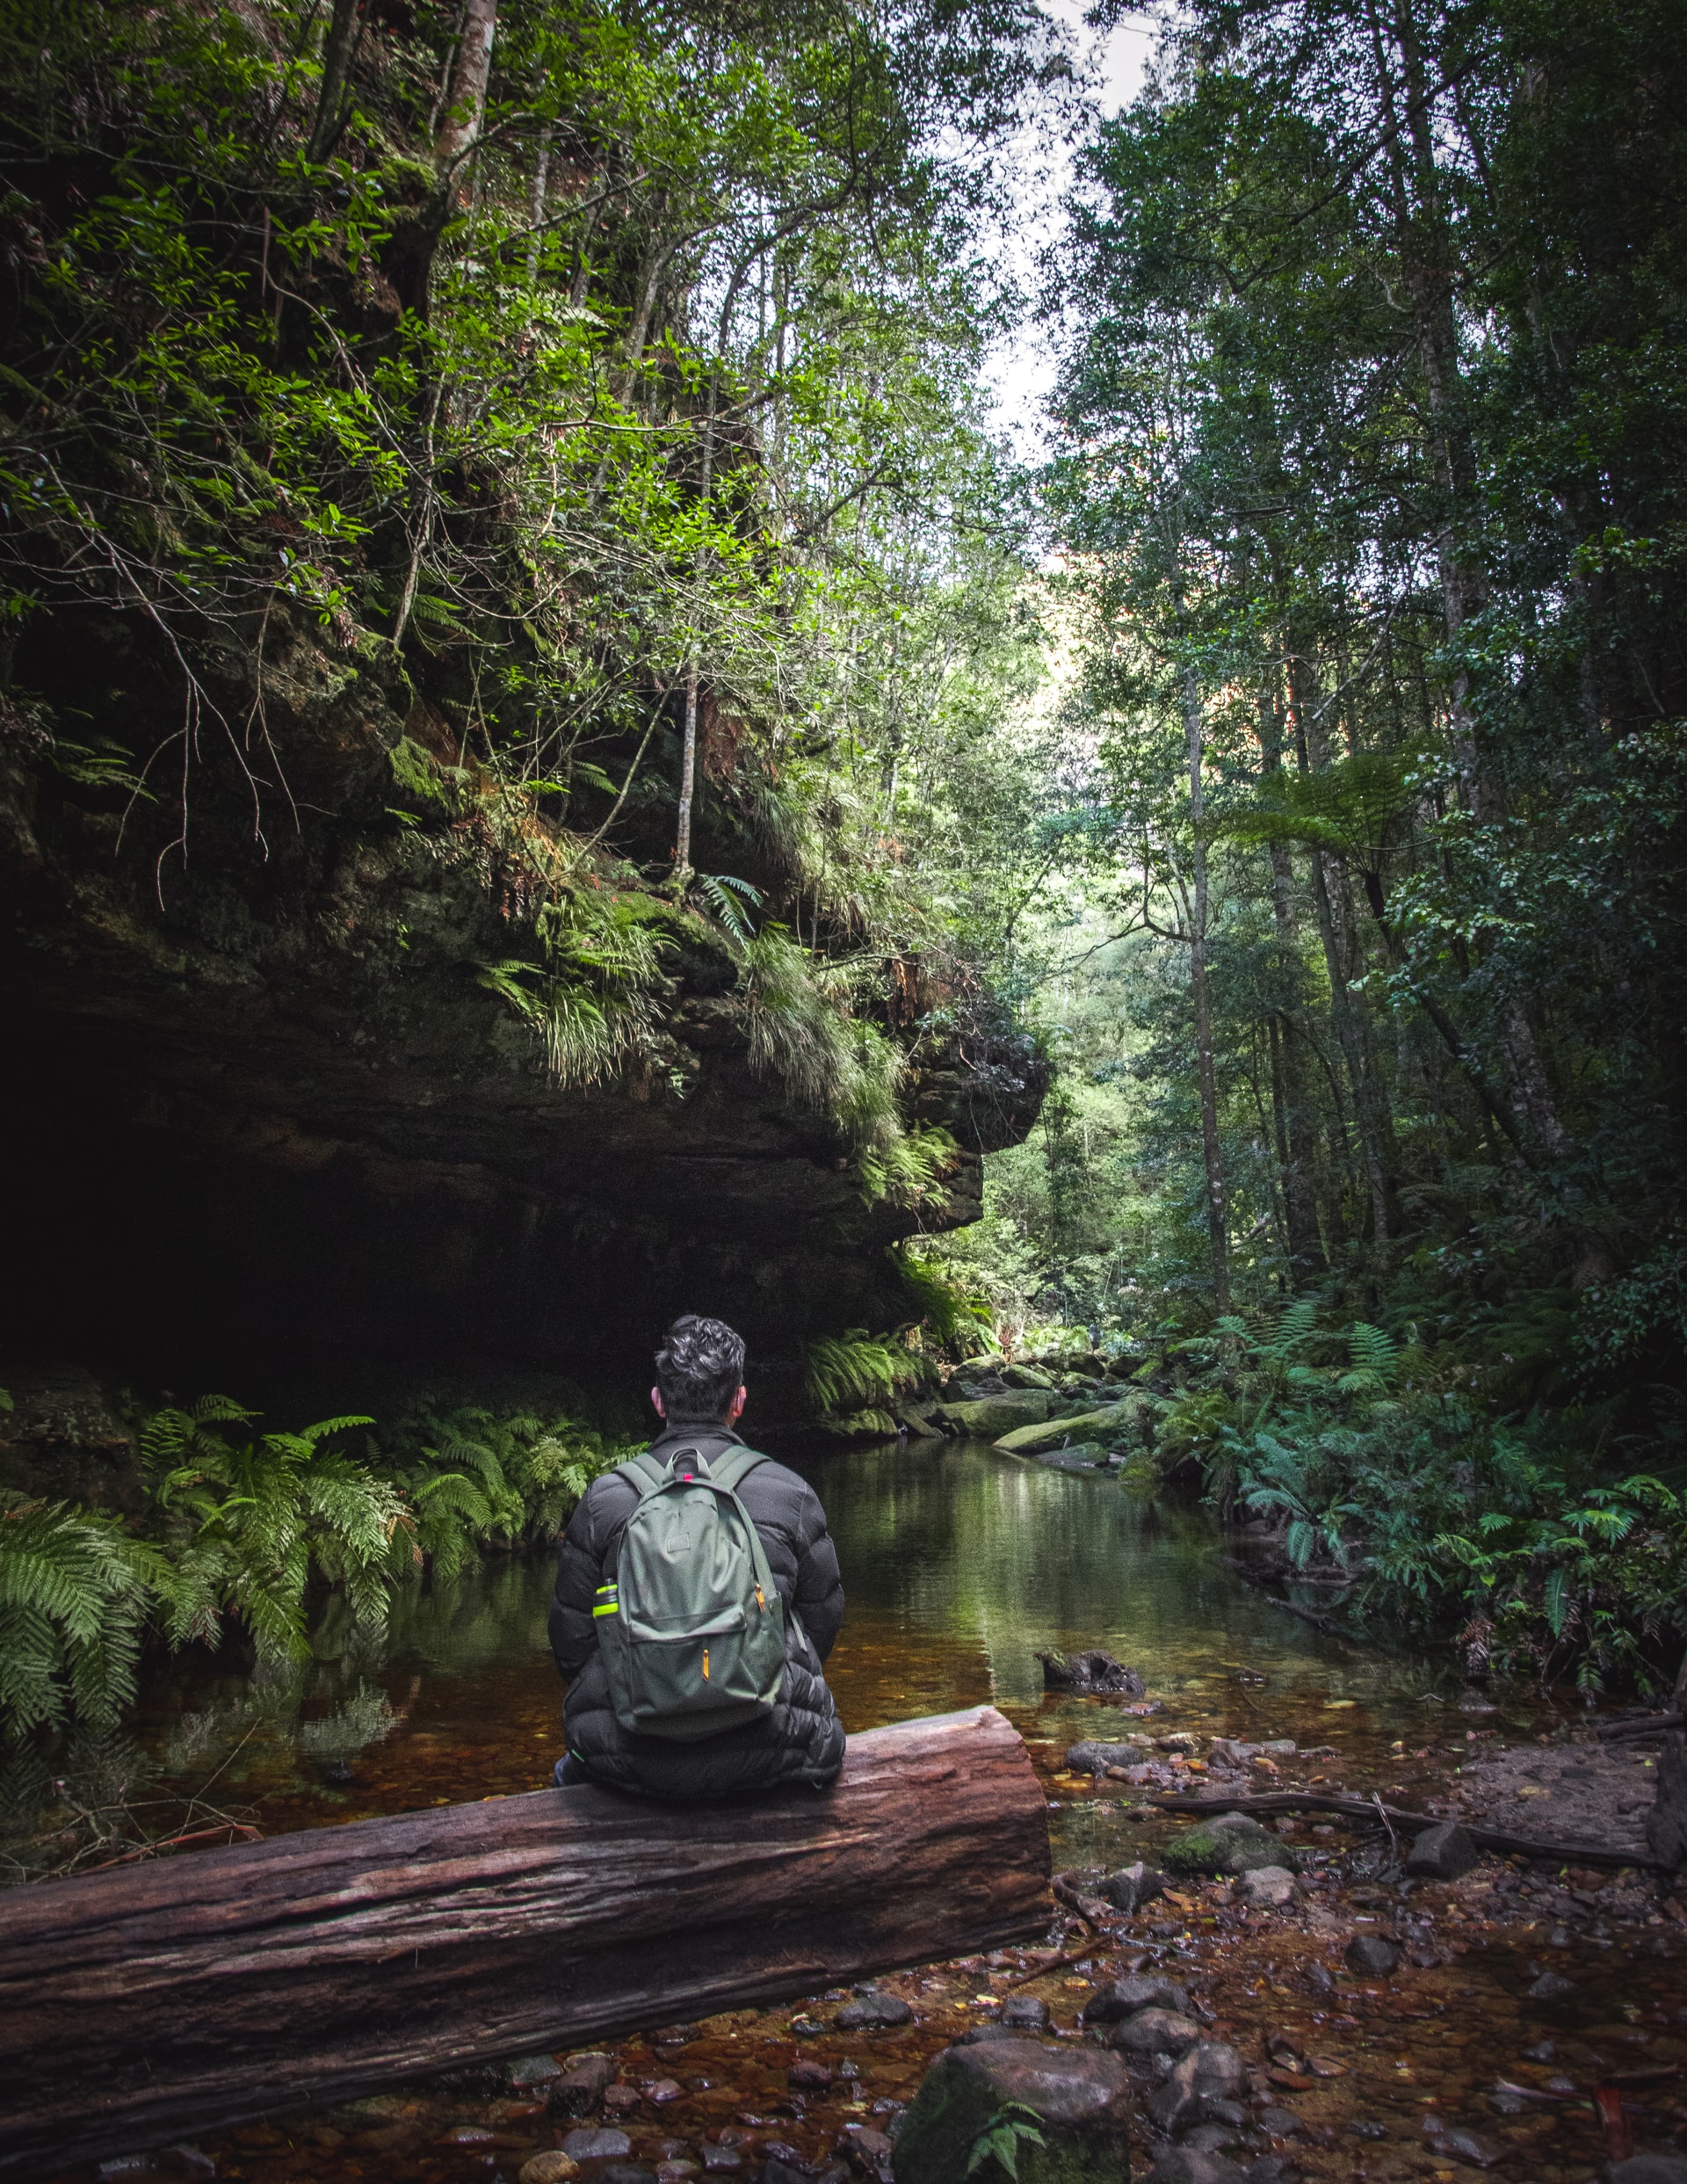 A person wearing a backpack sits on a log over a river surrounded by lush forest